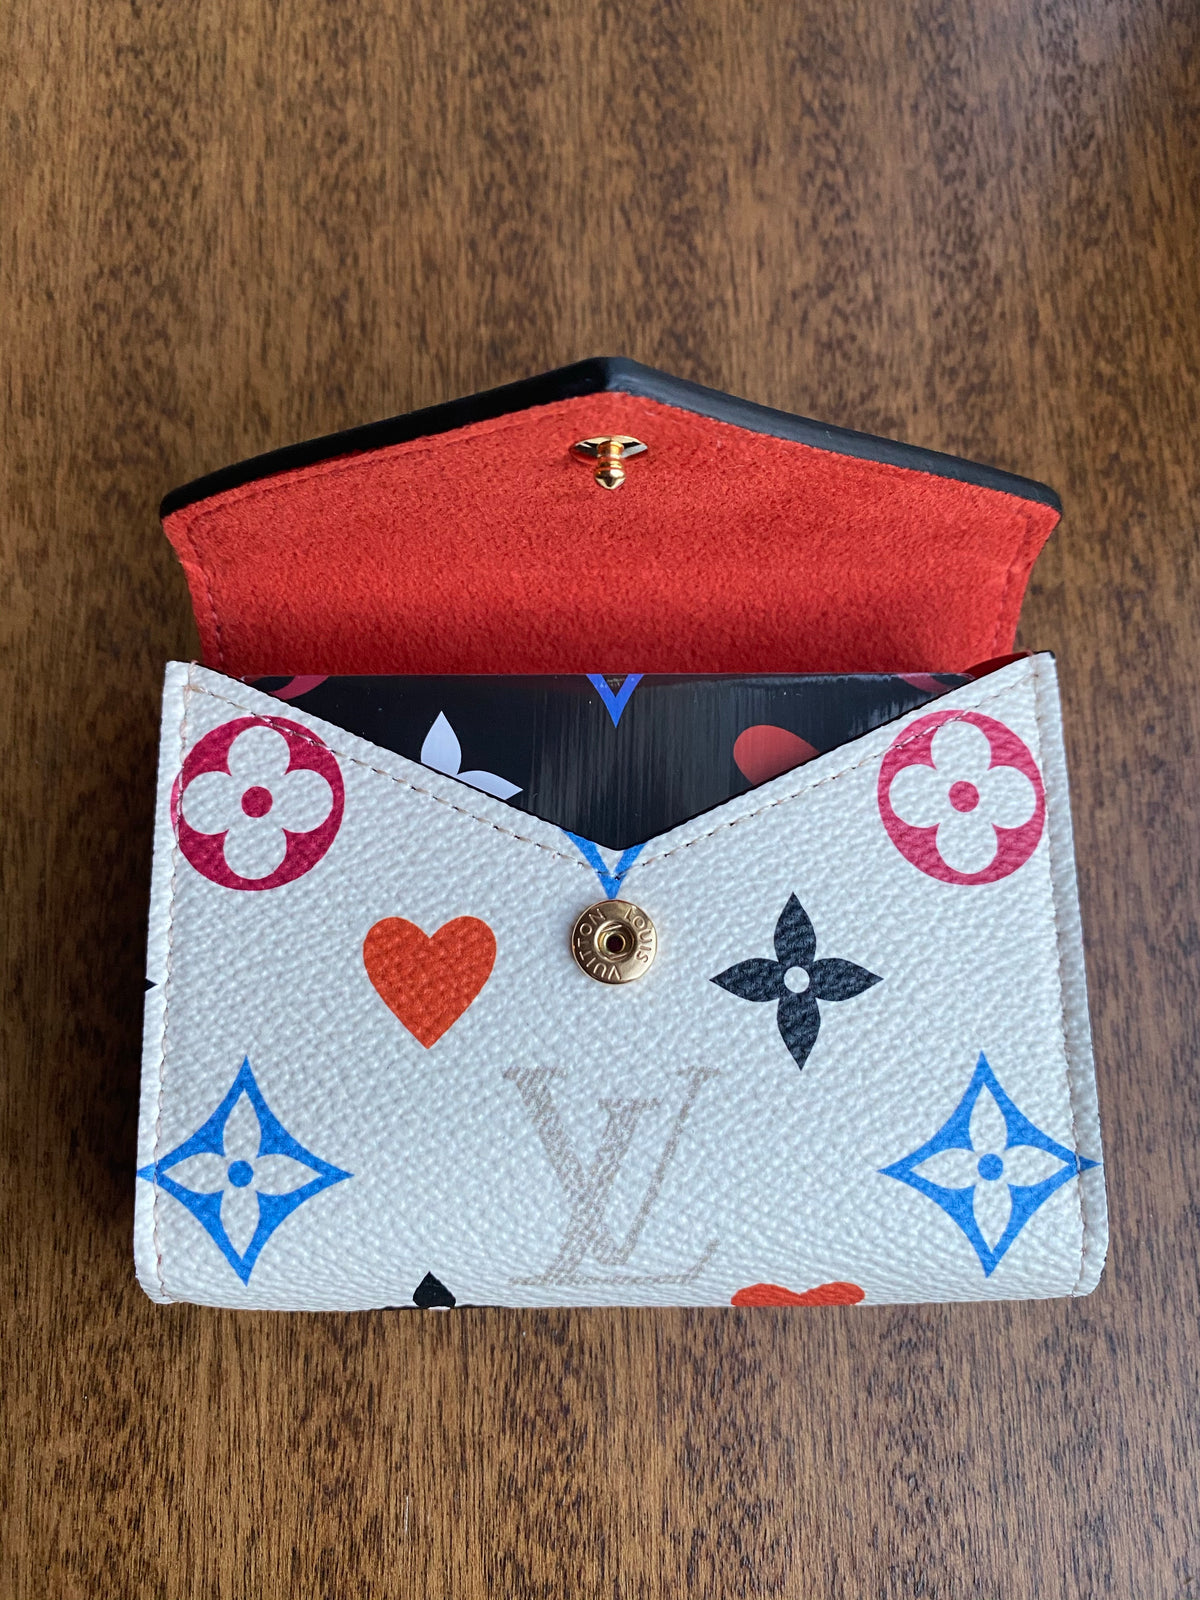 Internet Reactions To Heart Evangelista's Louis Vuitton Playing Cards